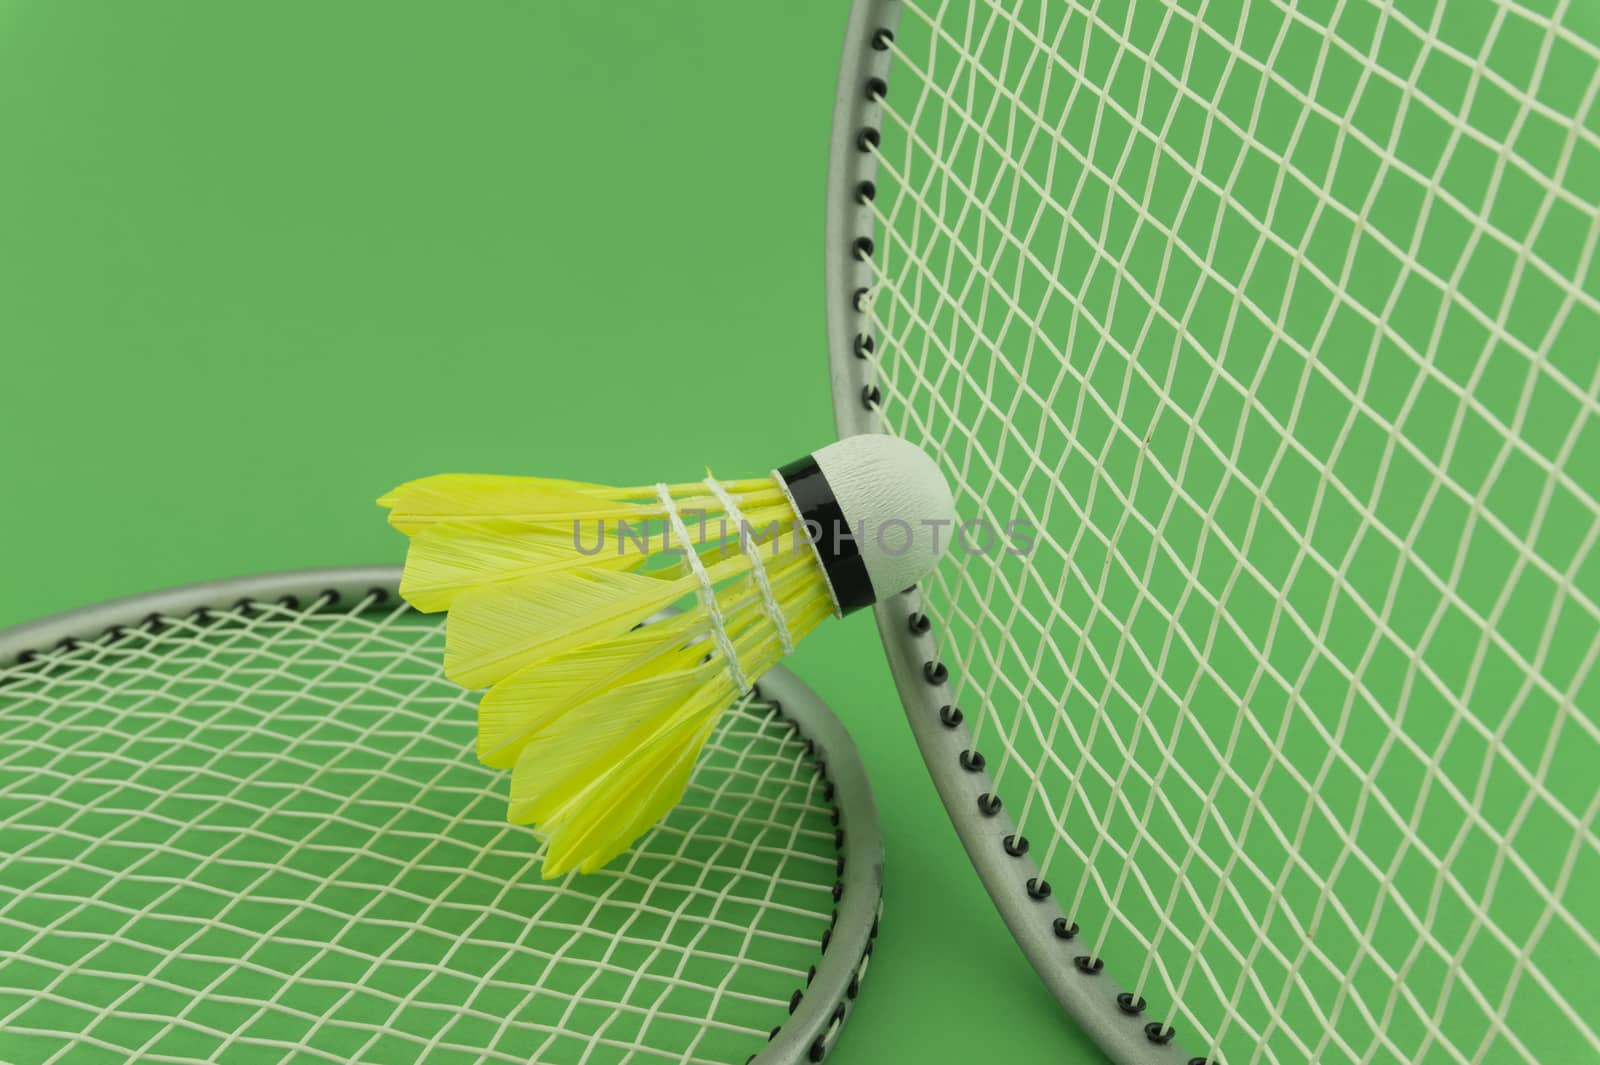 Badminton rackets and yellow feathered shuttlecocks on green background in a close up view